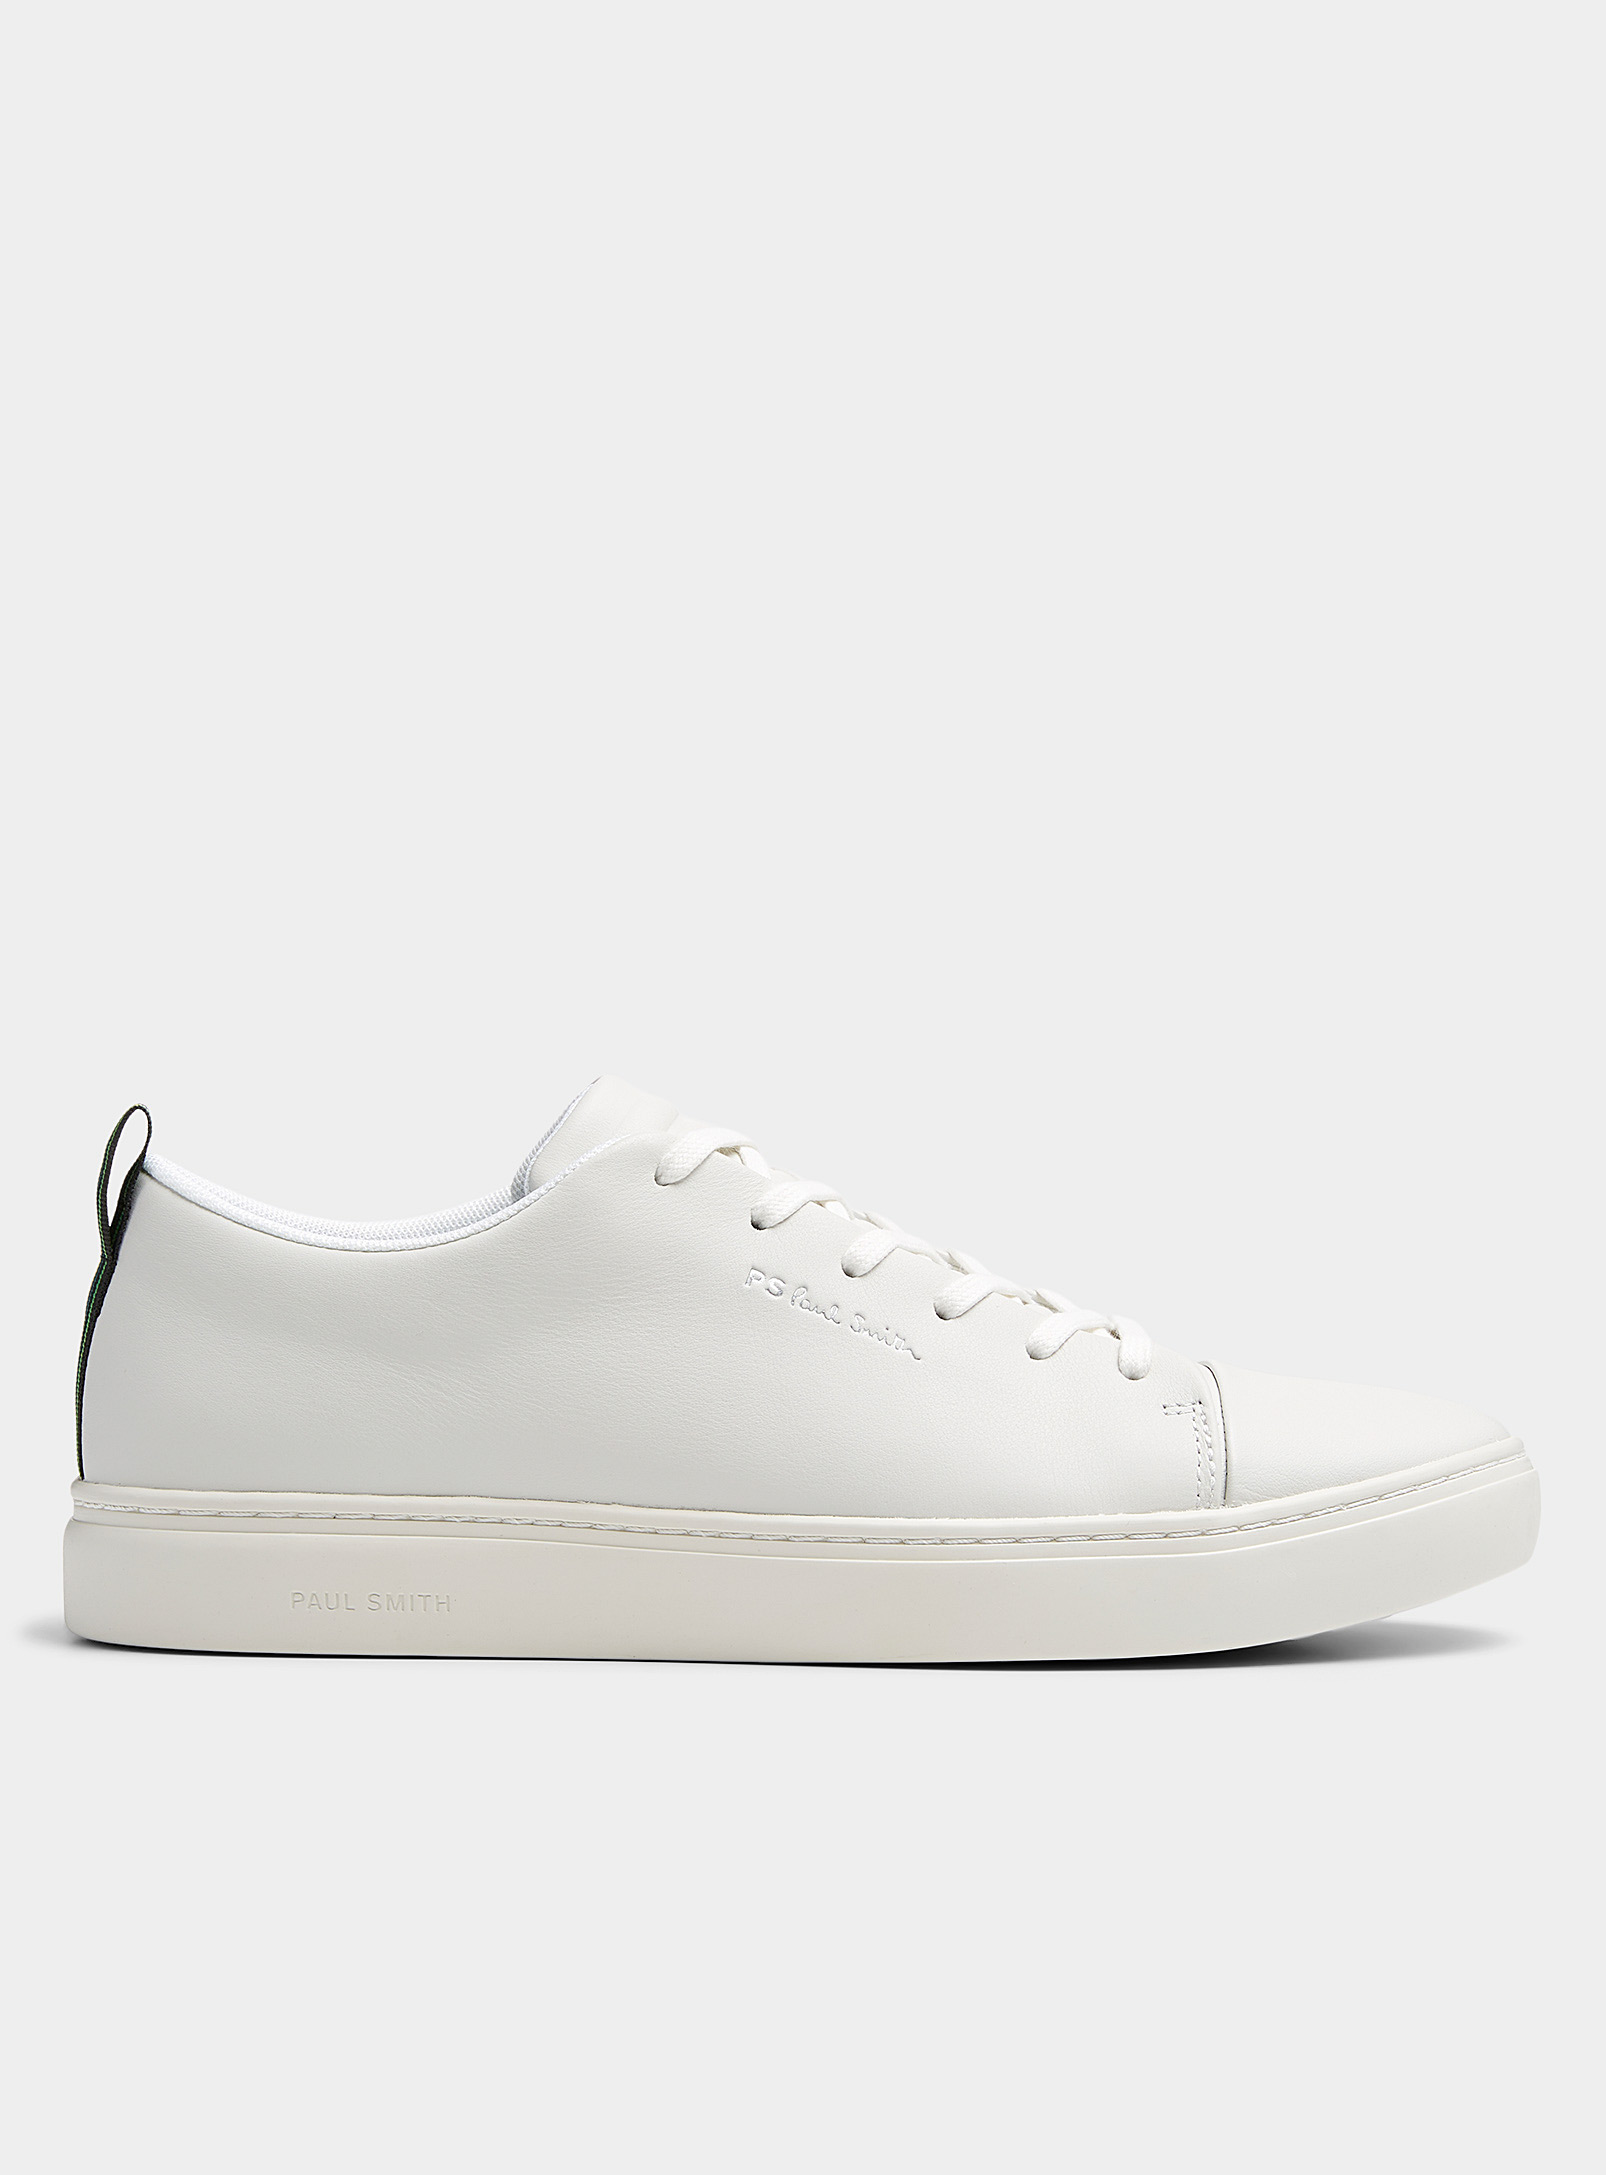 PS Paul Smith - Men's Lee white leather sneakers Men